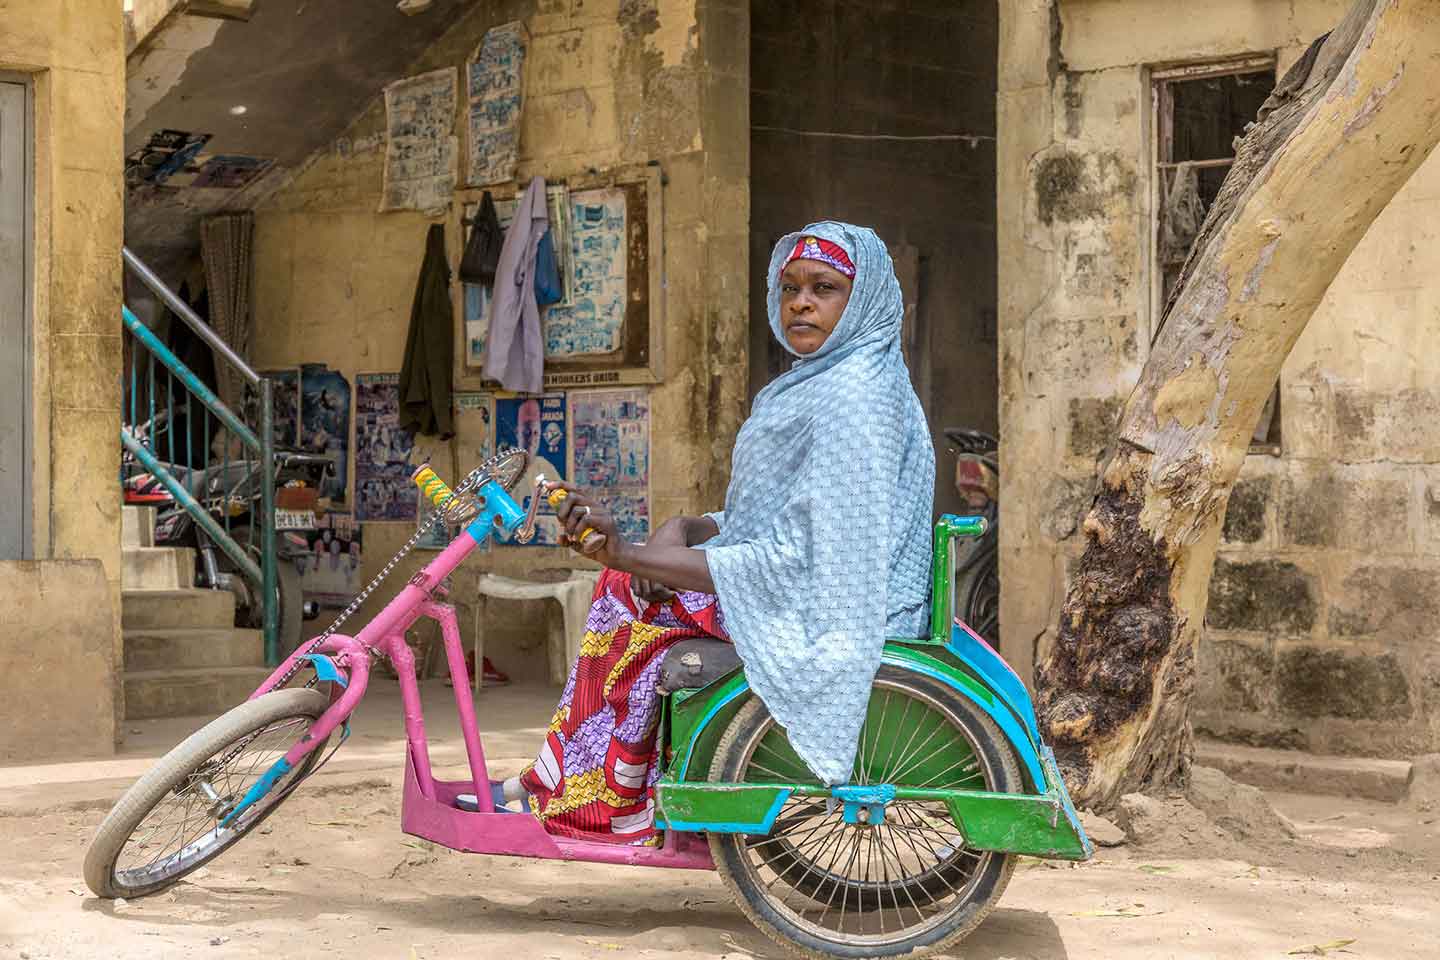  Paralysed as a child by polio, Mariam Umar from Kano State has been working as a community mobilizer with the polio eradication programme for seven years. “I help mobilize people, so my community would accept the vaccine when they see my situation.” © Andrew Esiebo/WHO